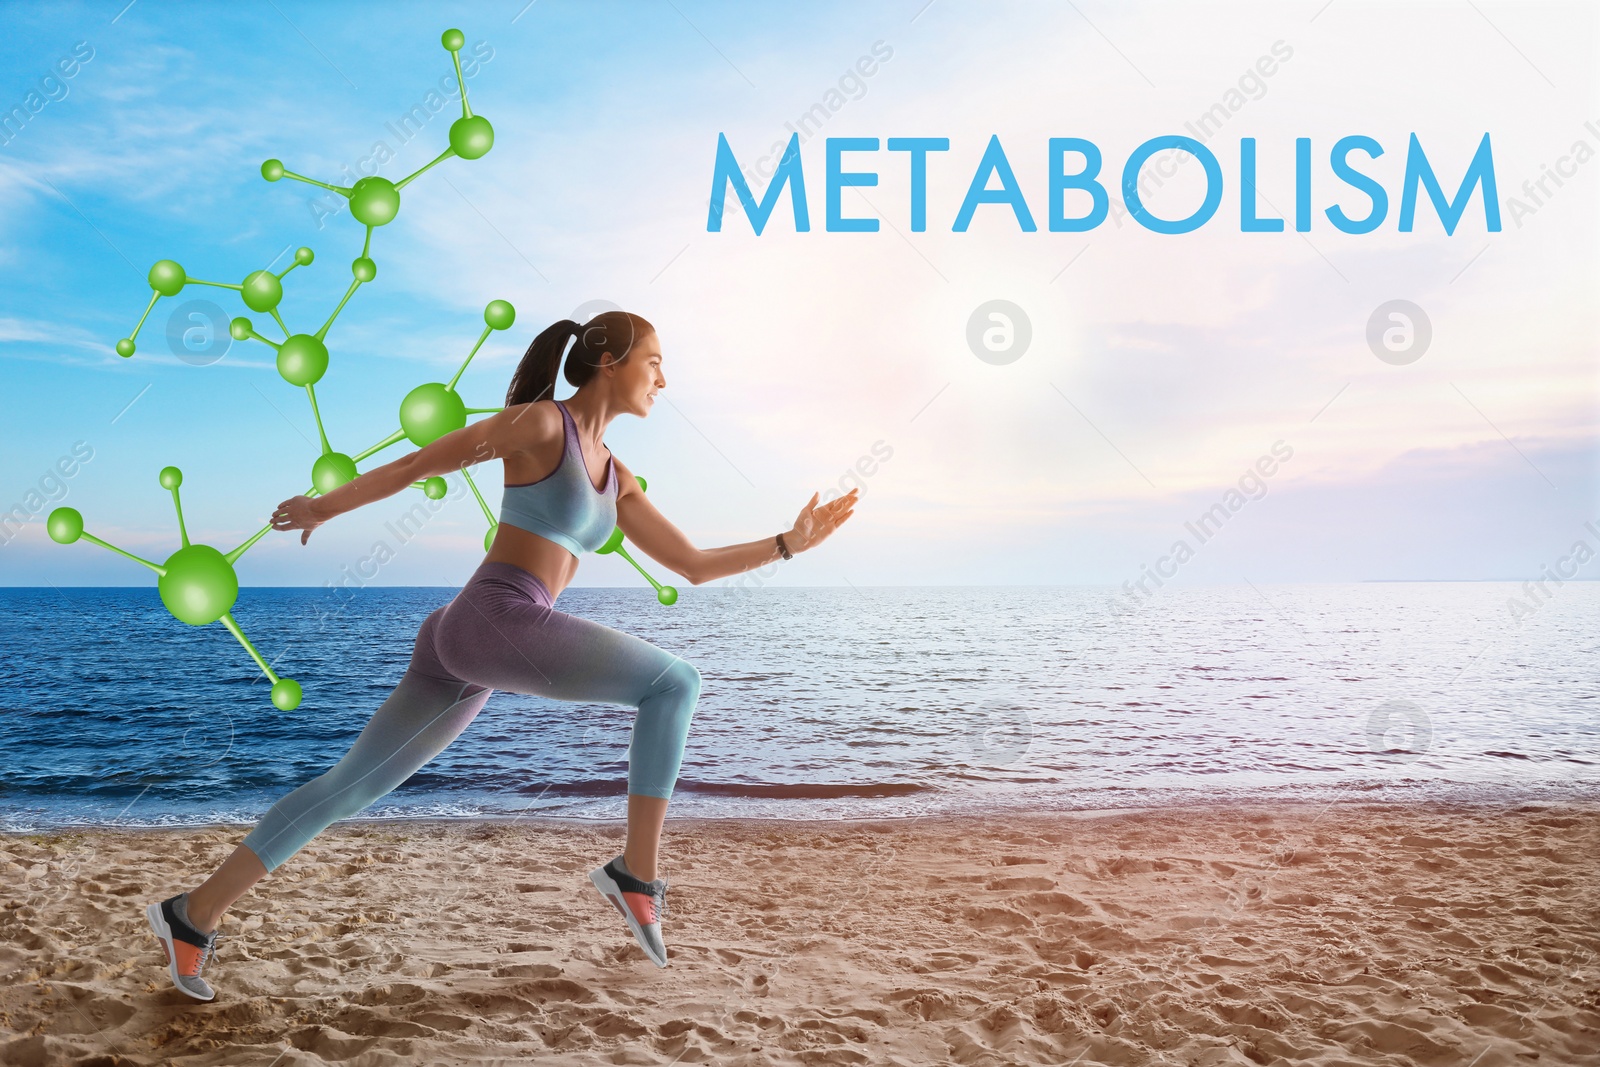 Image of Metabolism concept. Molecular chain illustration and athletic young woman running near sea on sunny day